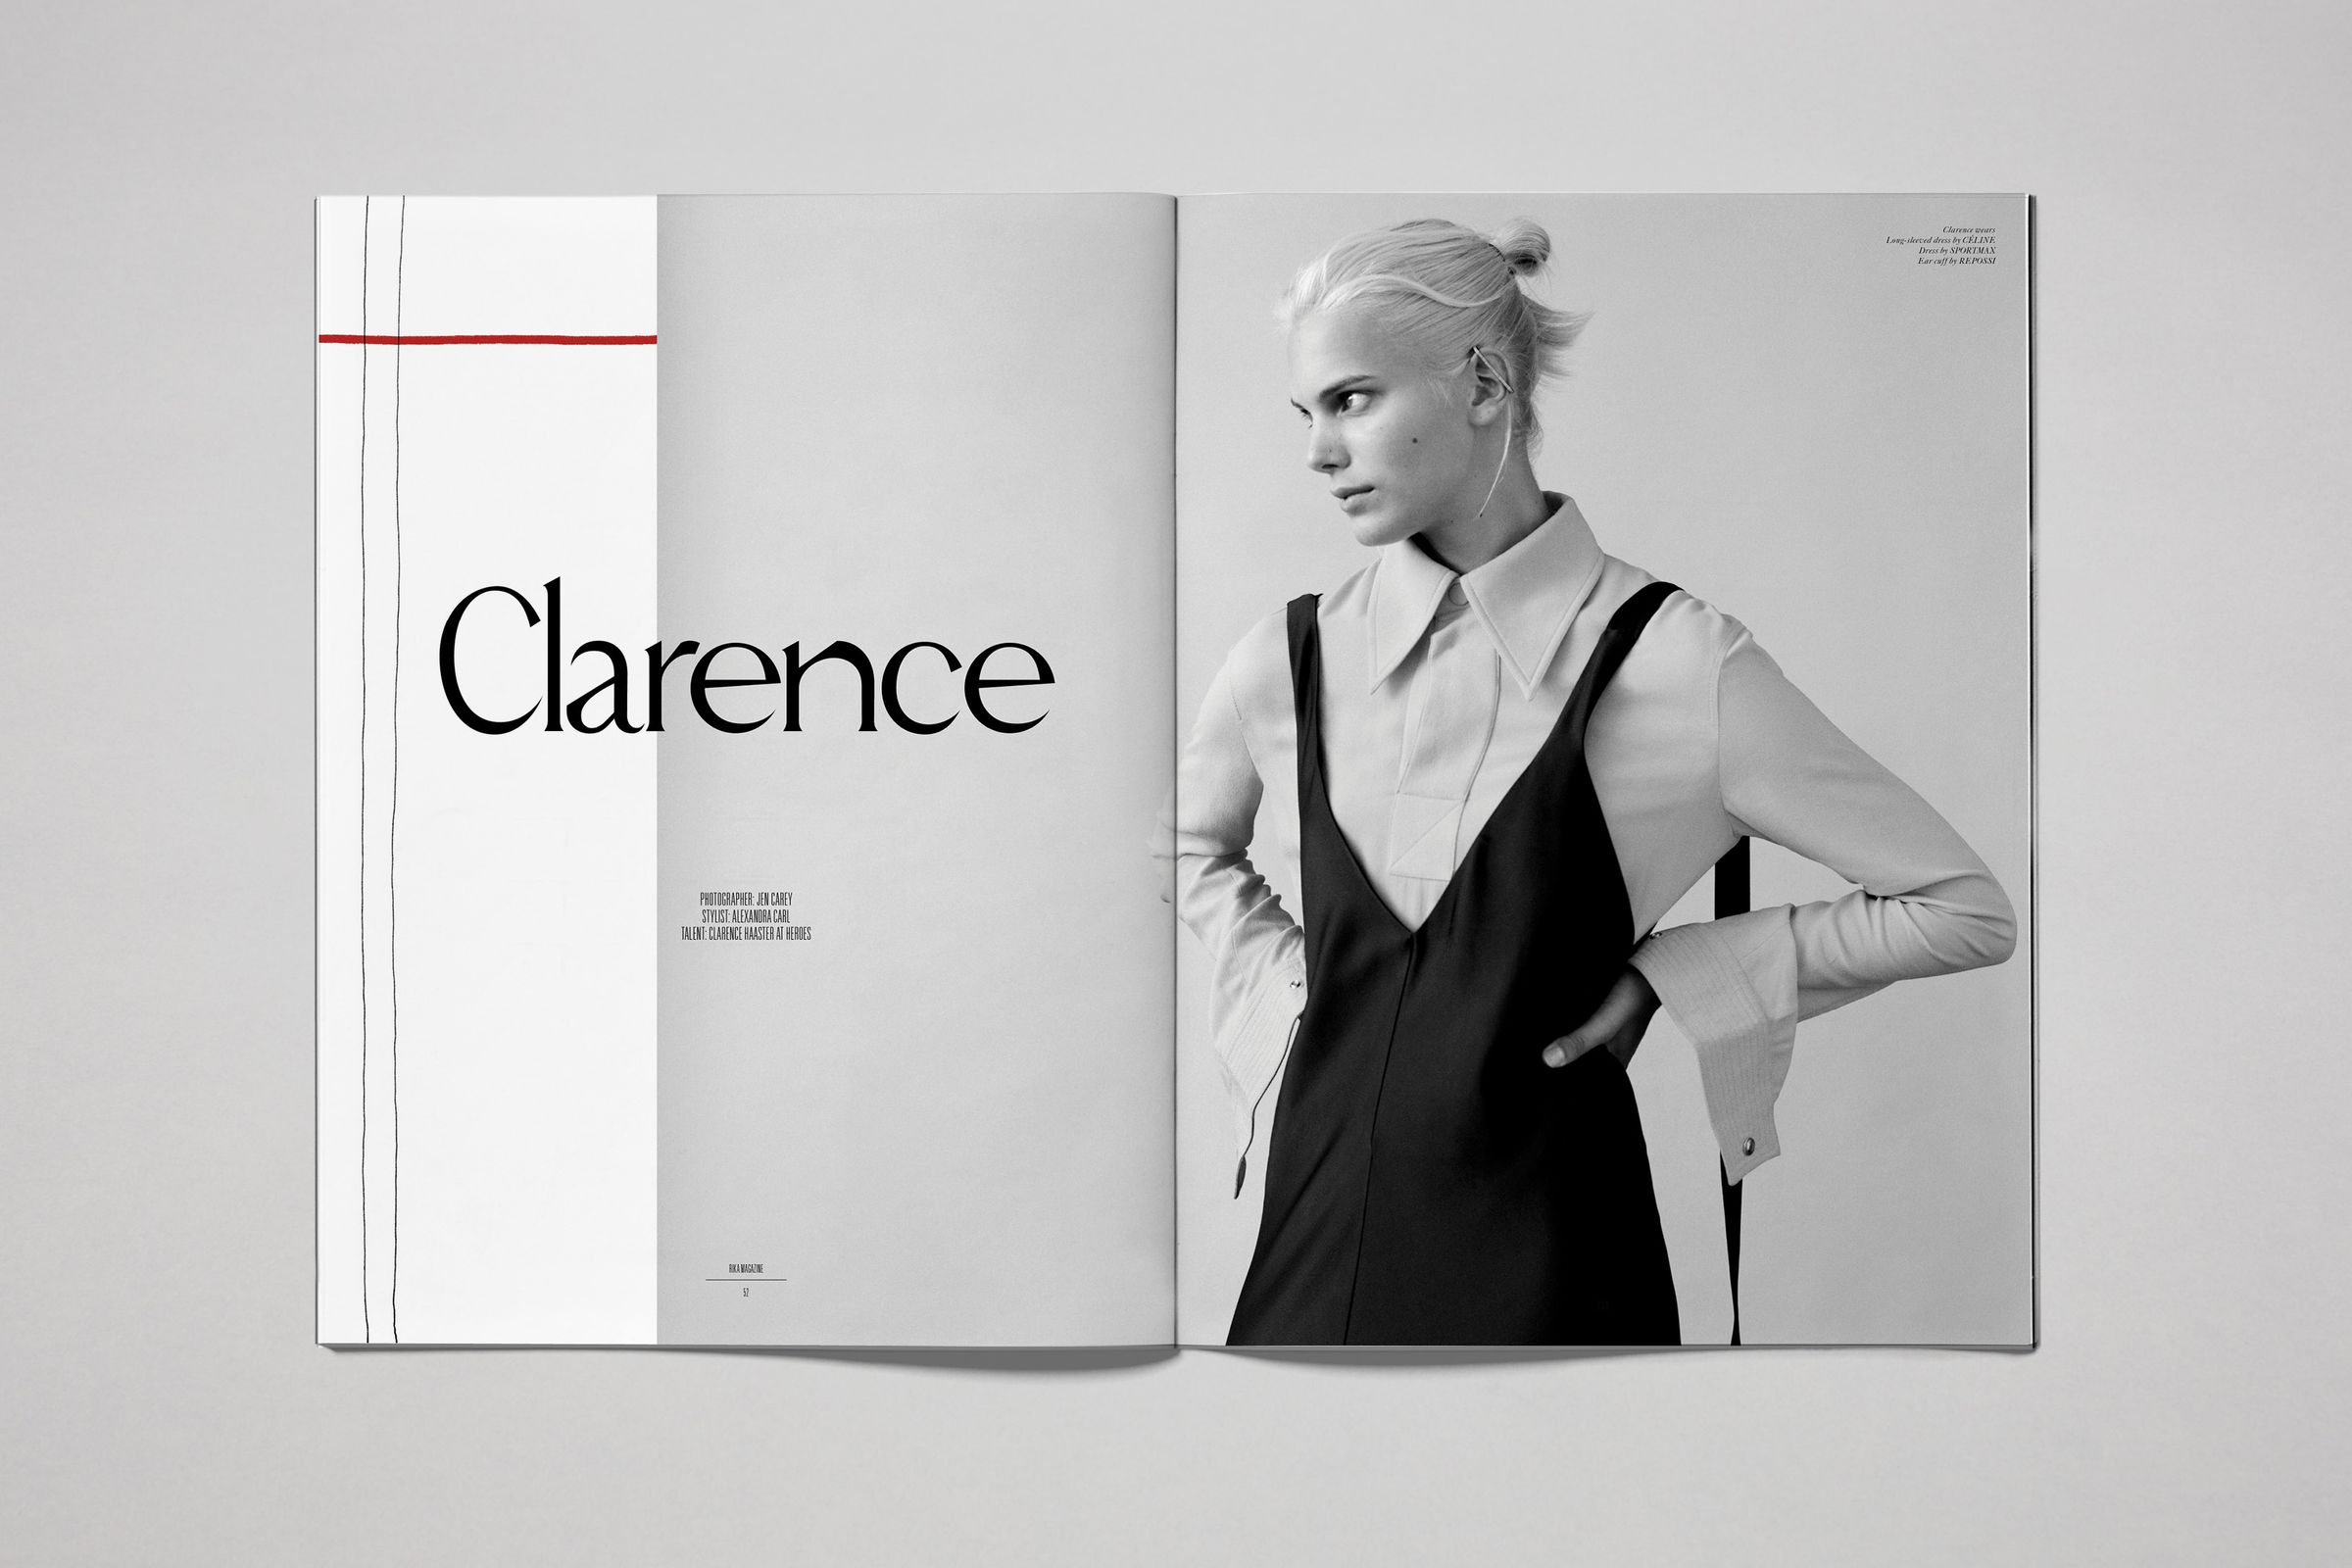 Rika Magazine issue no. 15 Clarence Haaster photographed by Jen Carey